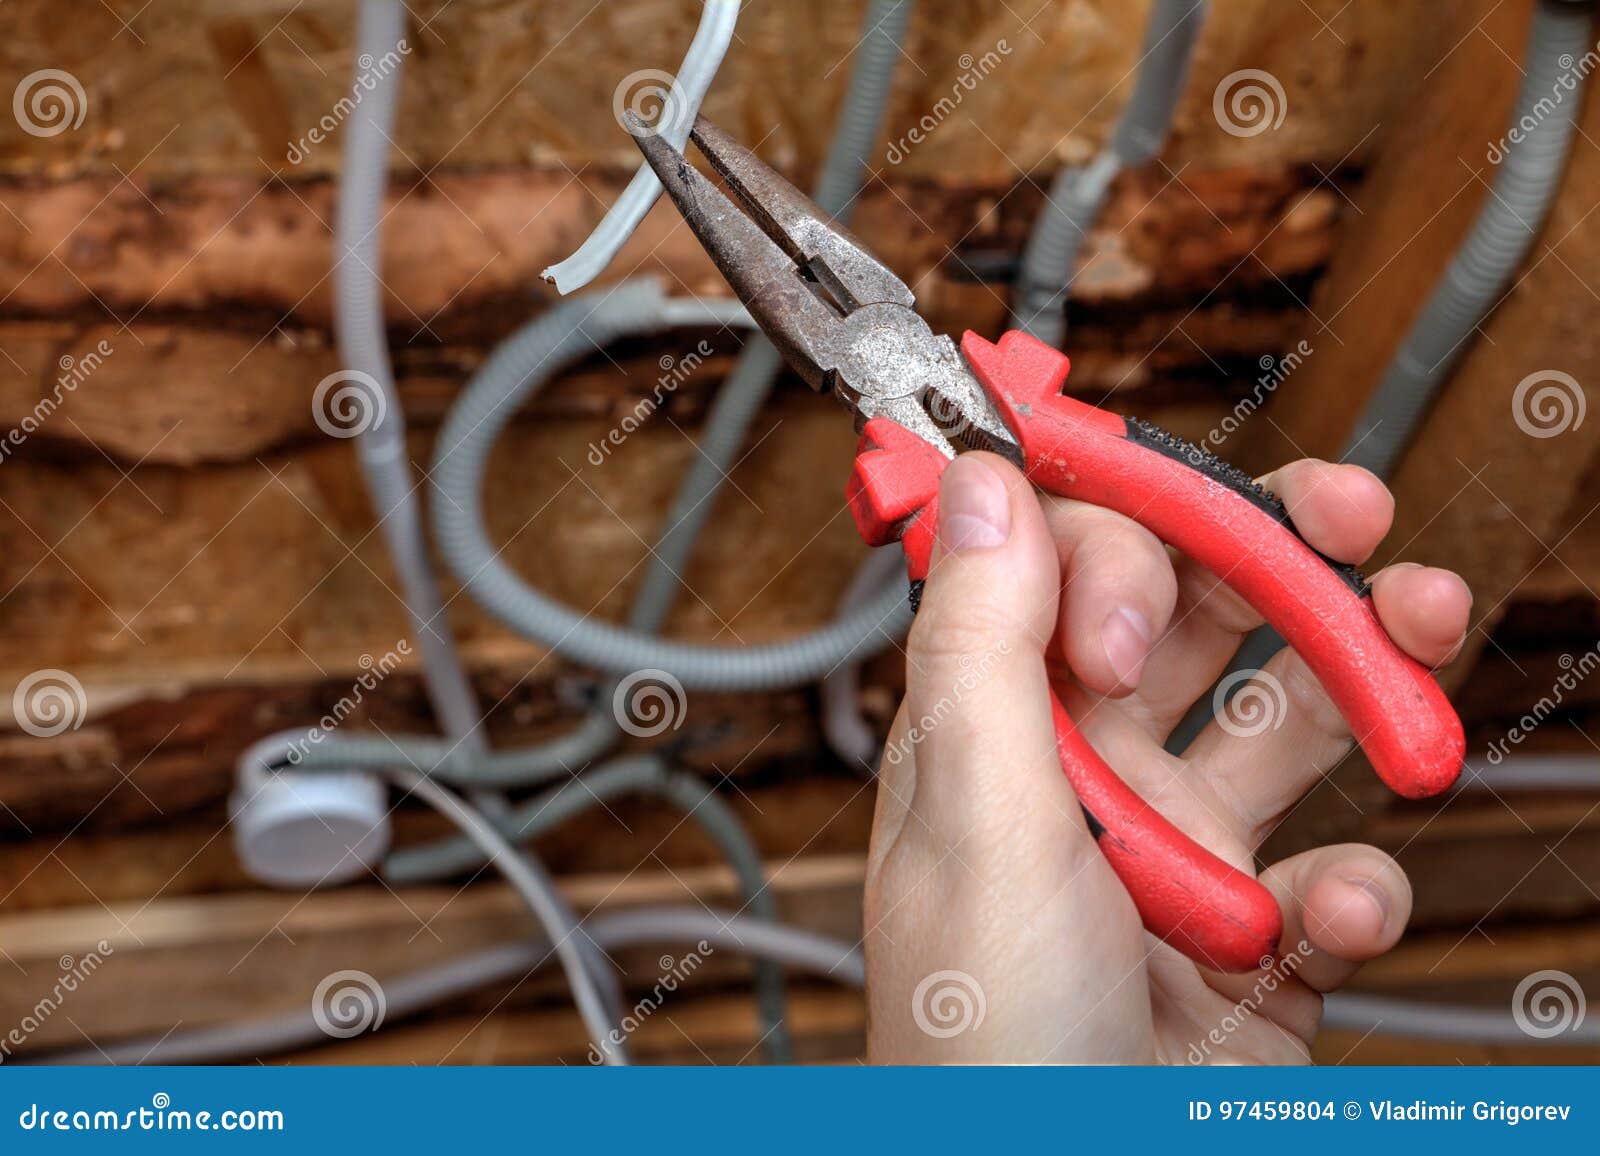 Electrician Hand With Pliers During Install Mount Light Junction